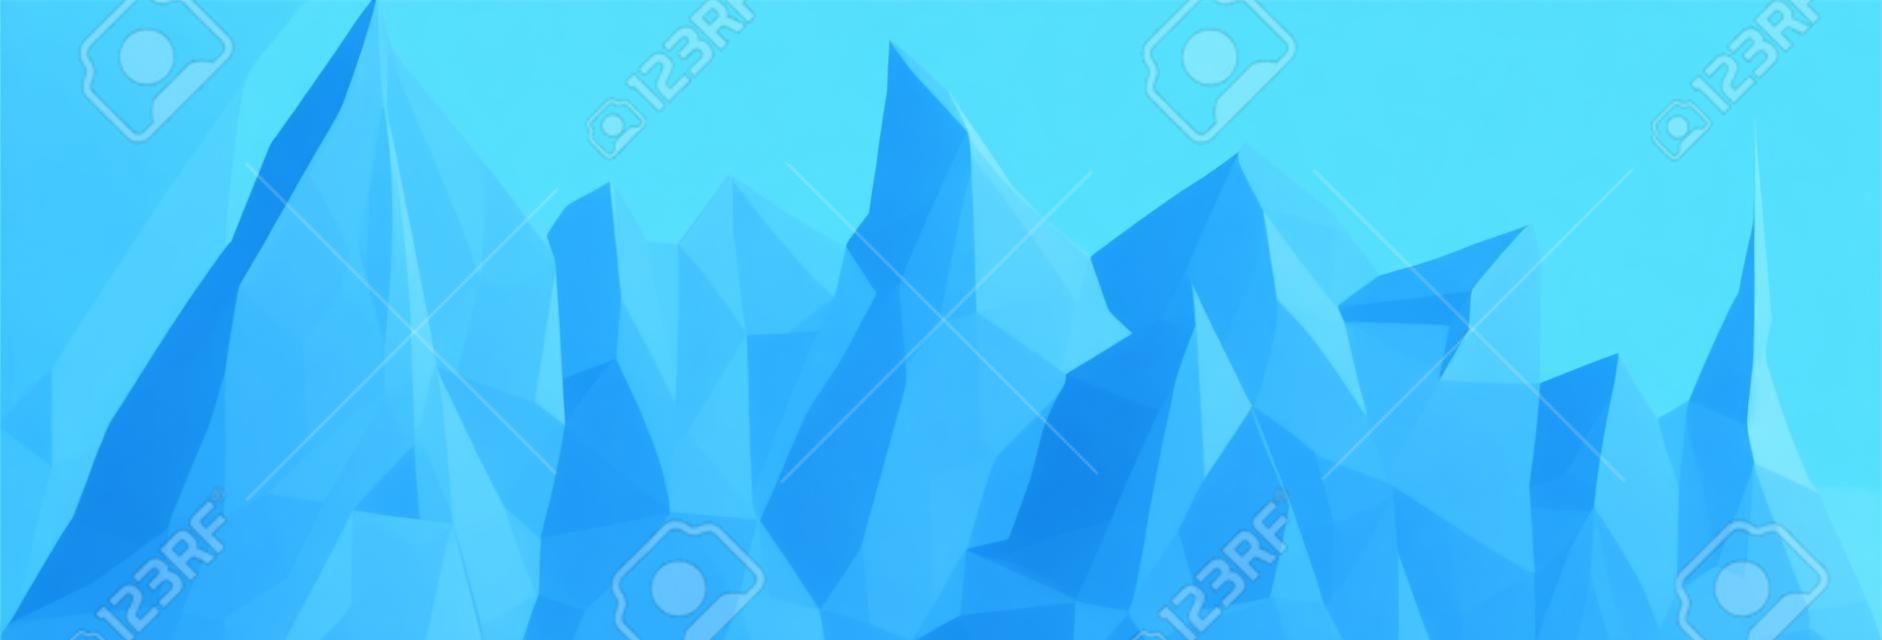 Monochrome mountains in low poly style. Polygonal mountain ridges. Vector landscape background